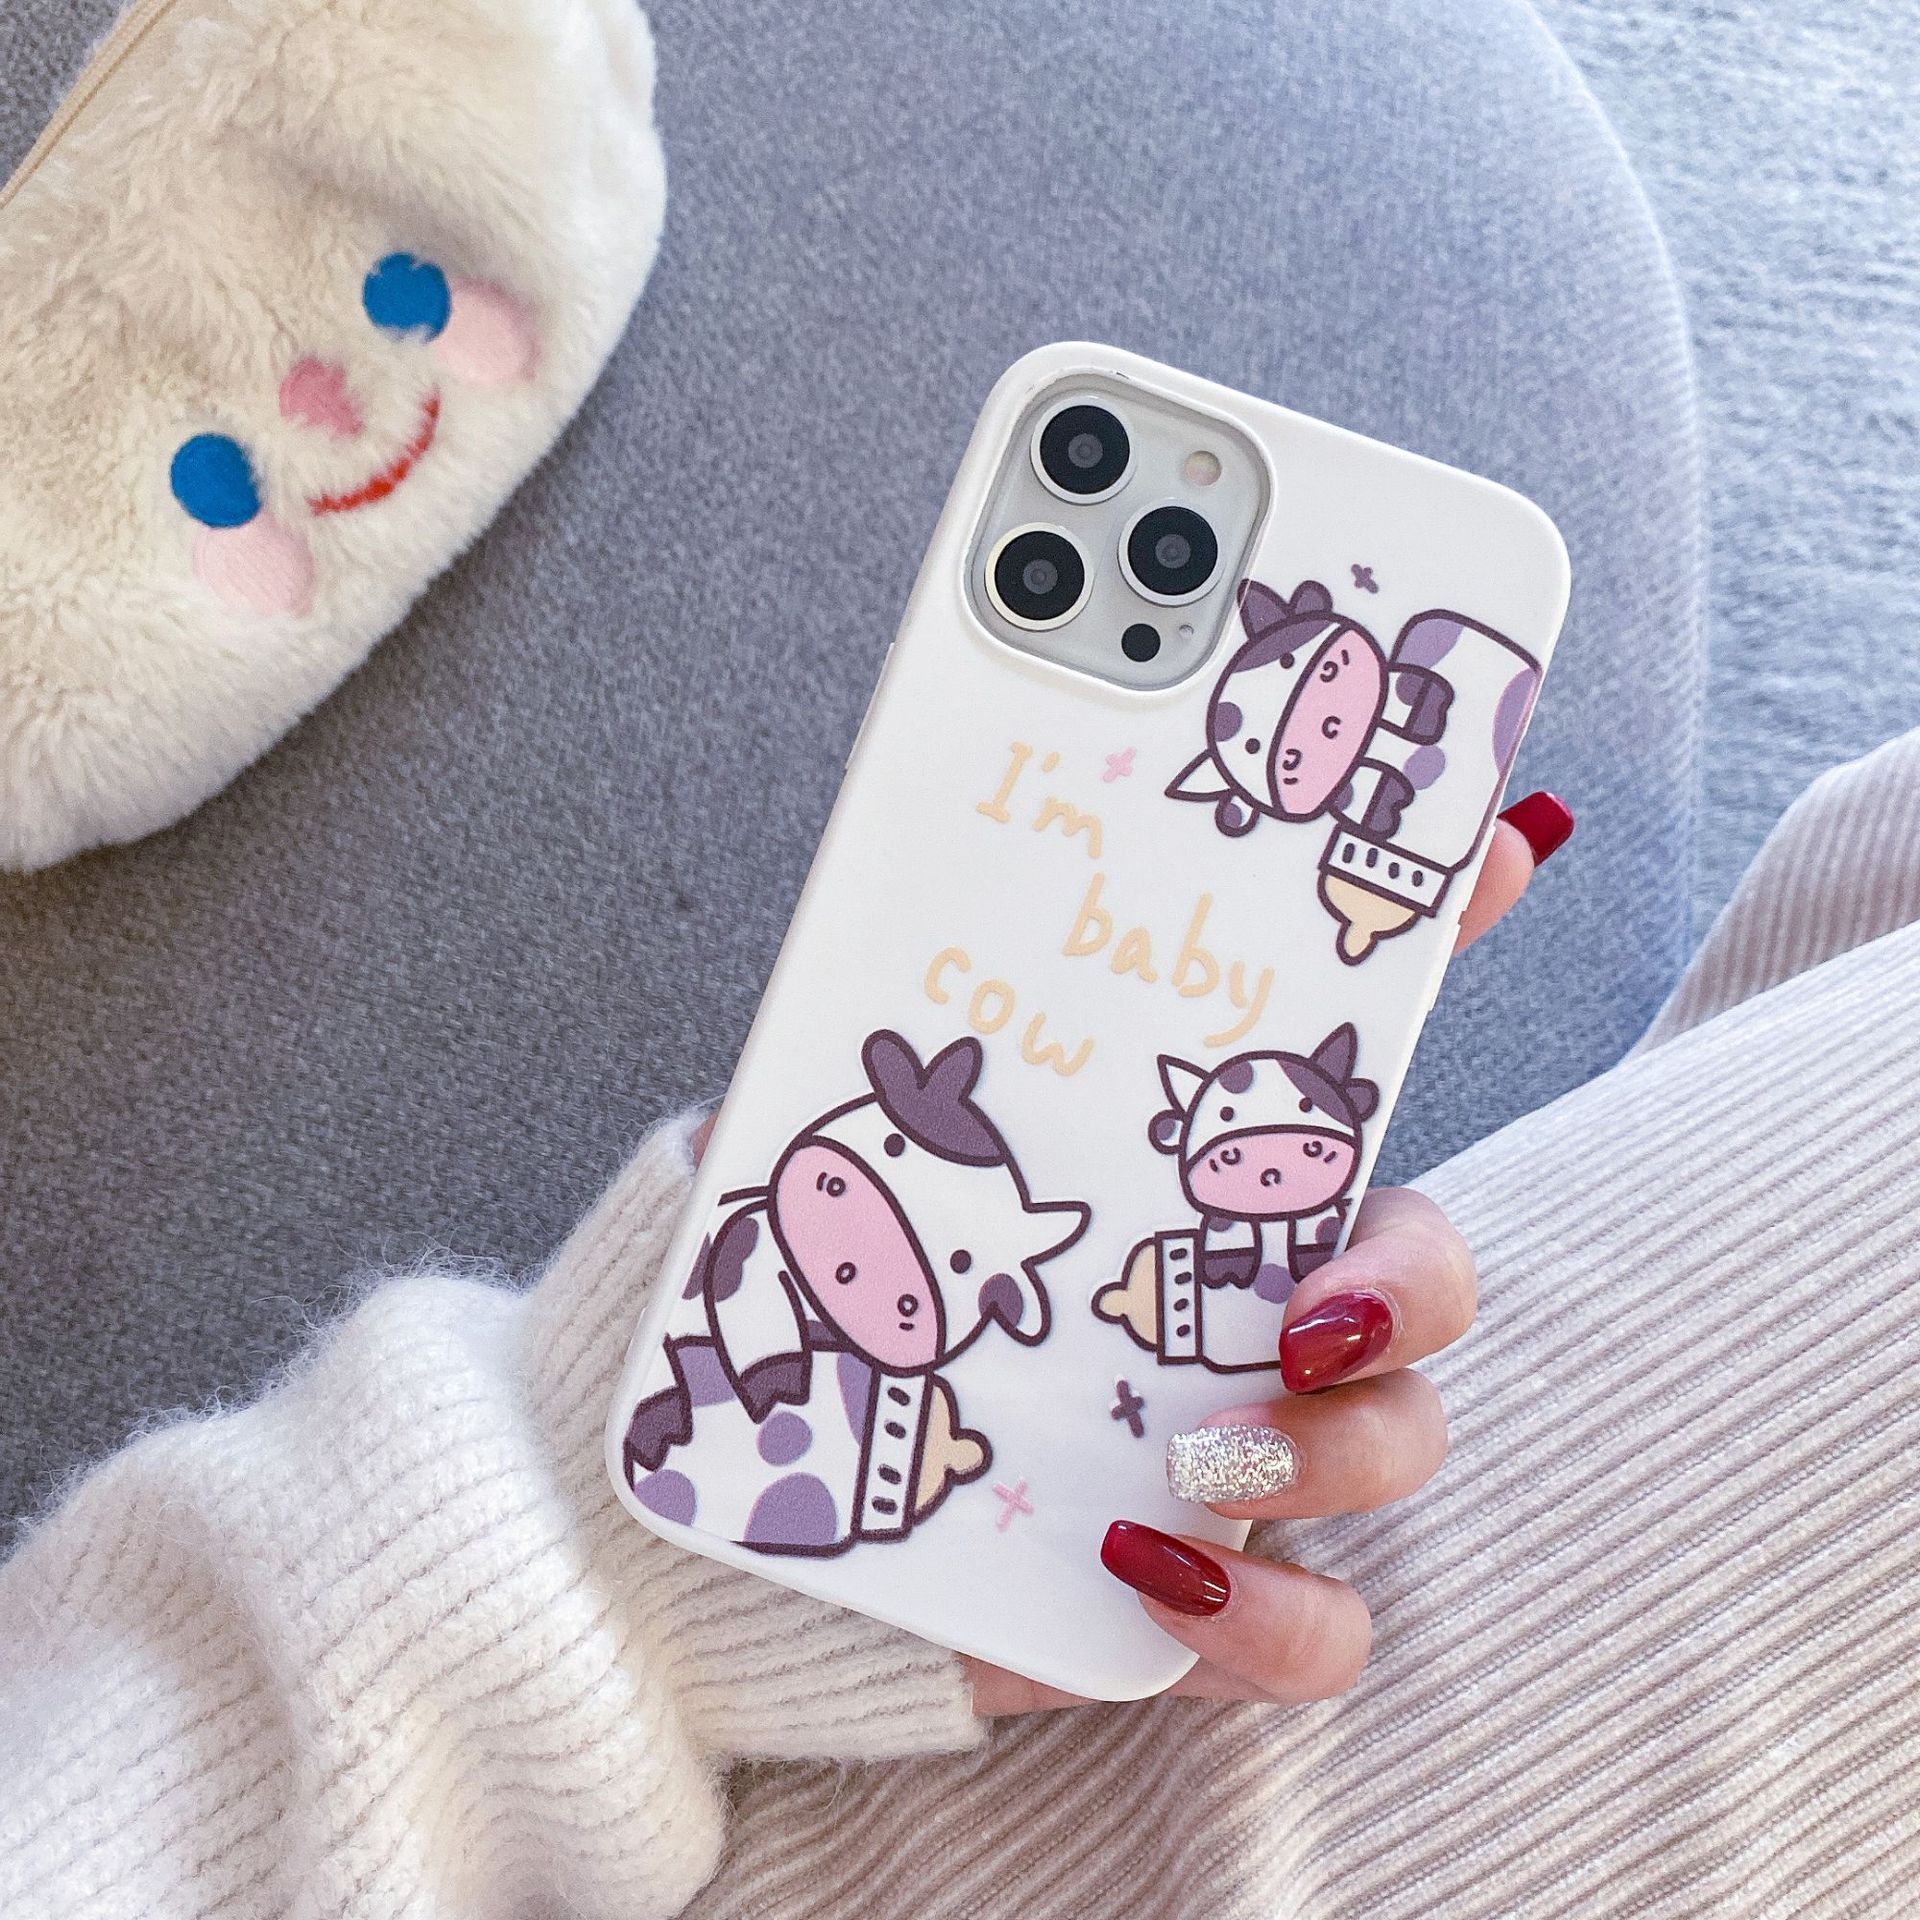 Cartoon Japanese and Korean Milk Bottle Is Suitable for IPhone 12 / 11pro Case, 6plus Soft TPU, Apple 7 / 8 / XS / 6 V Ỏ, Bao & Ố P L Ư Ng